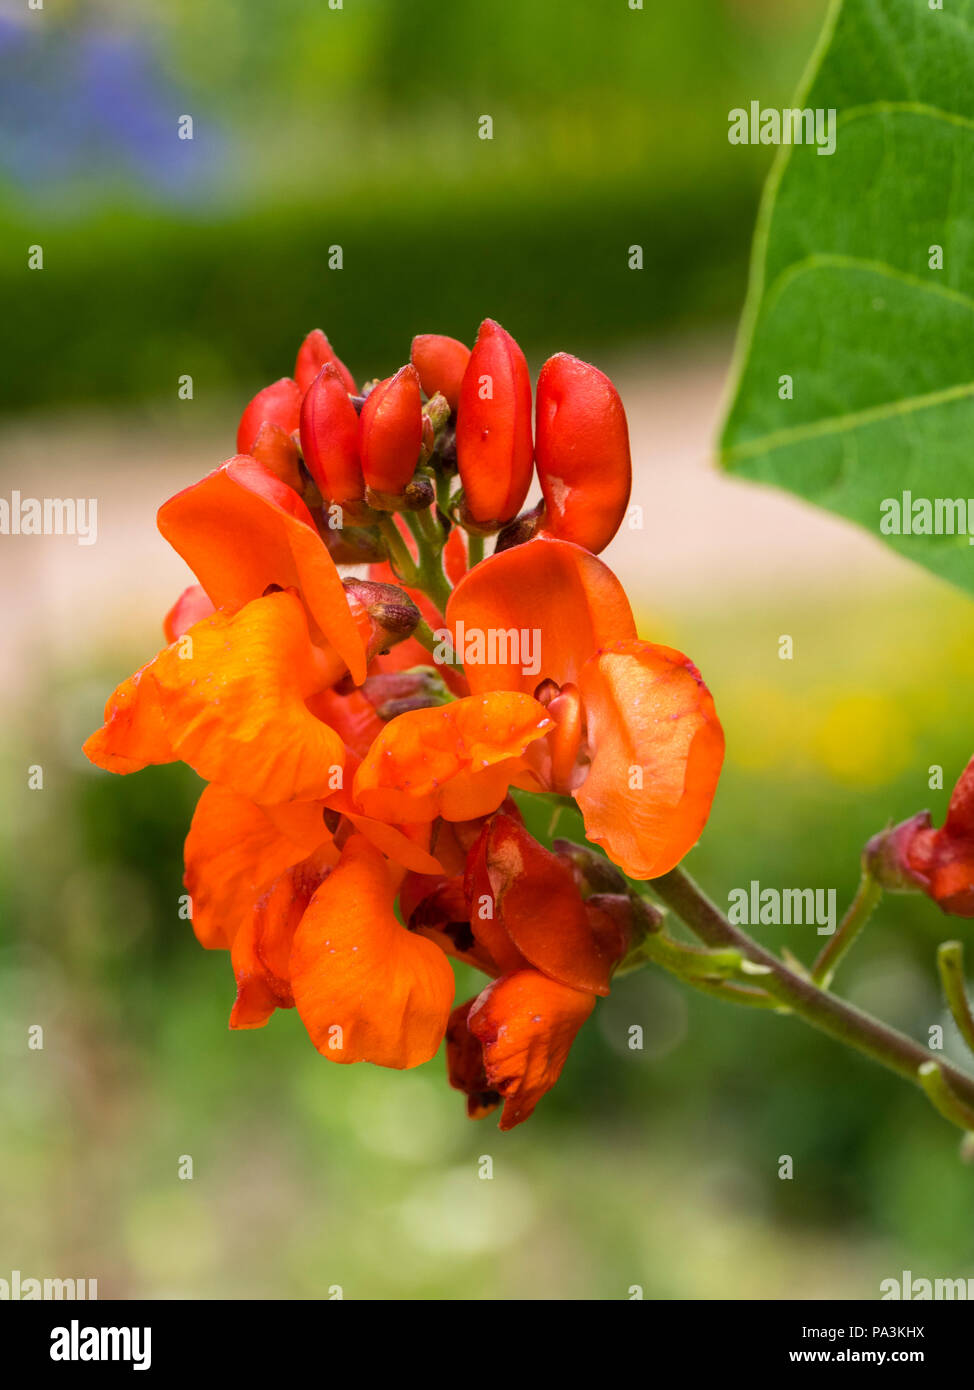 Ornamental red flowers of the runner bean, Phaseolus coccineus 'Lady Di' Stock Photo